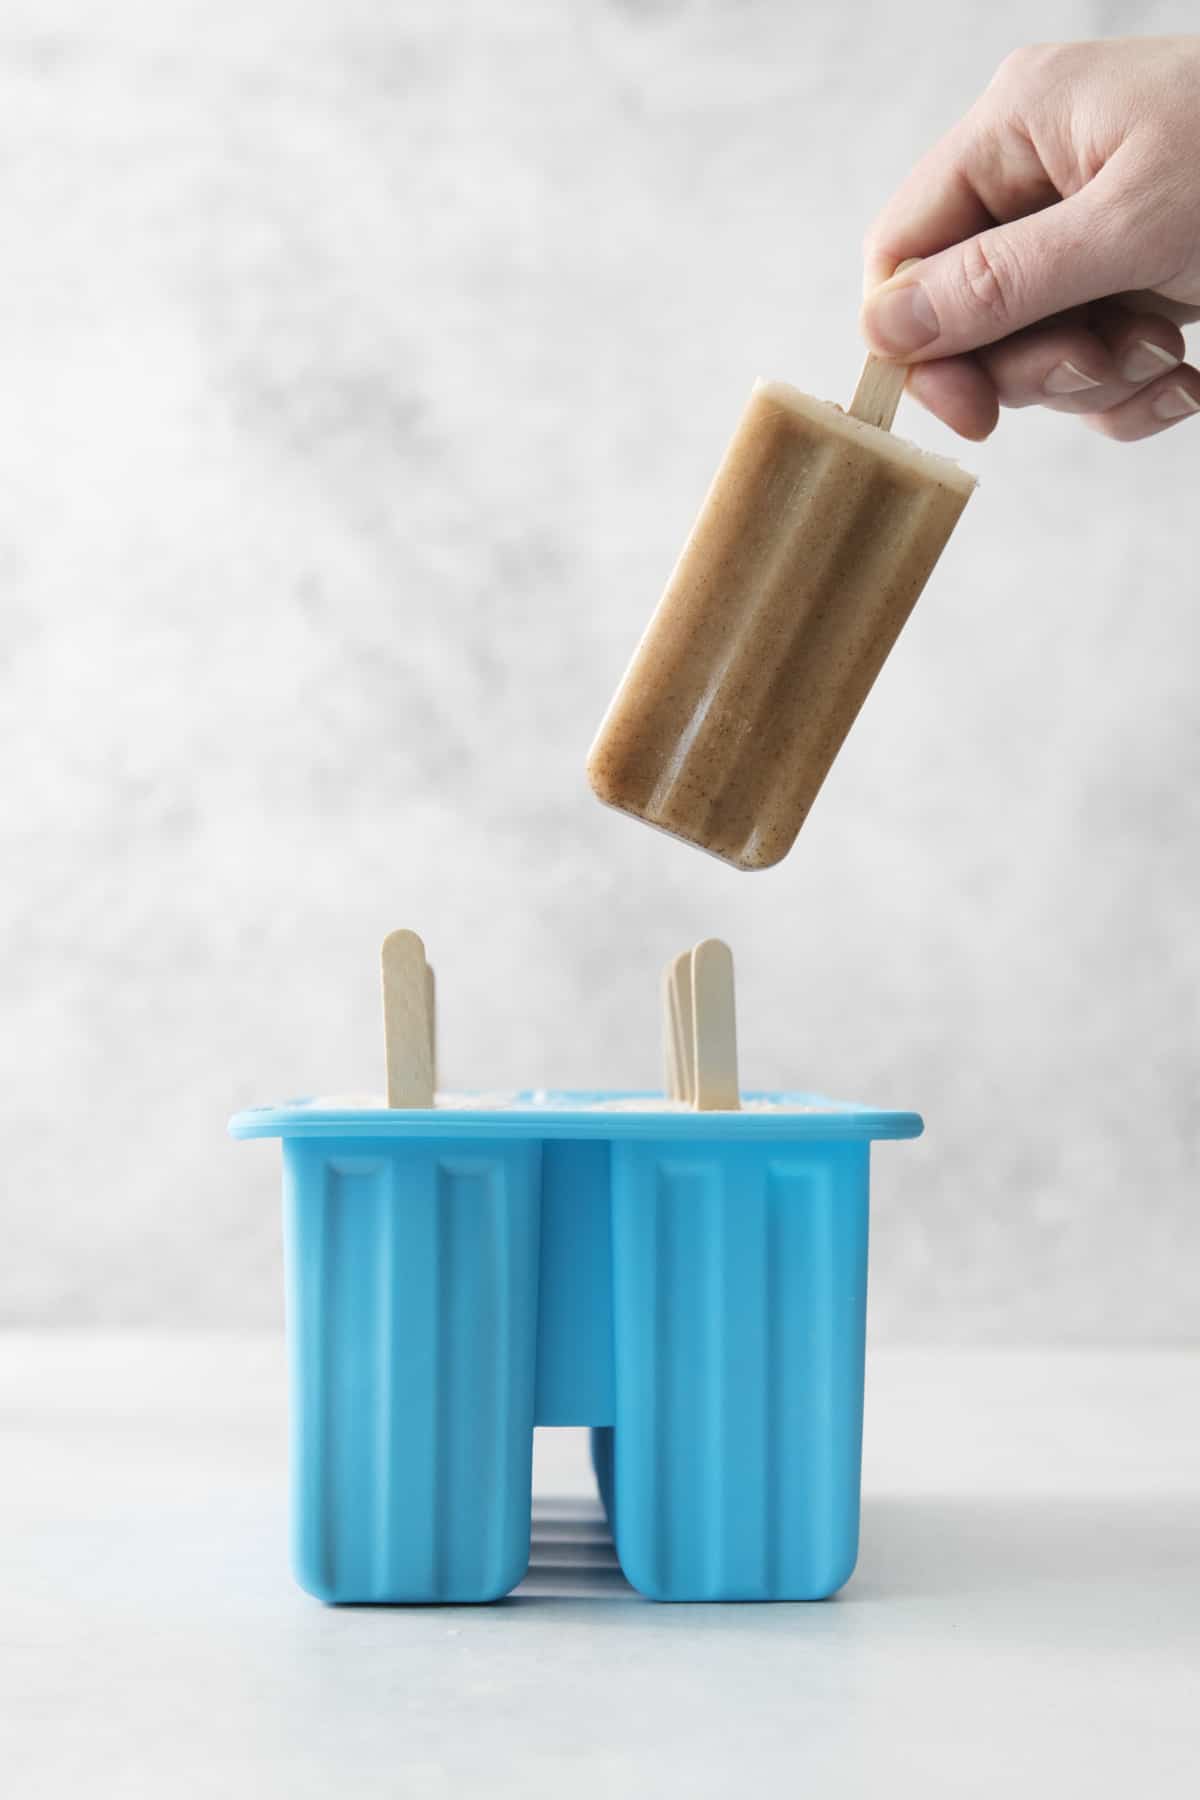 finished chai popsicles being taken out of a popsicle mold.